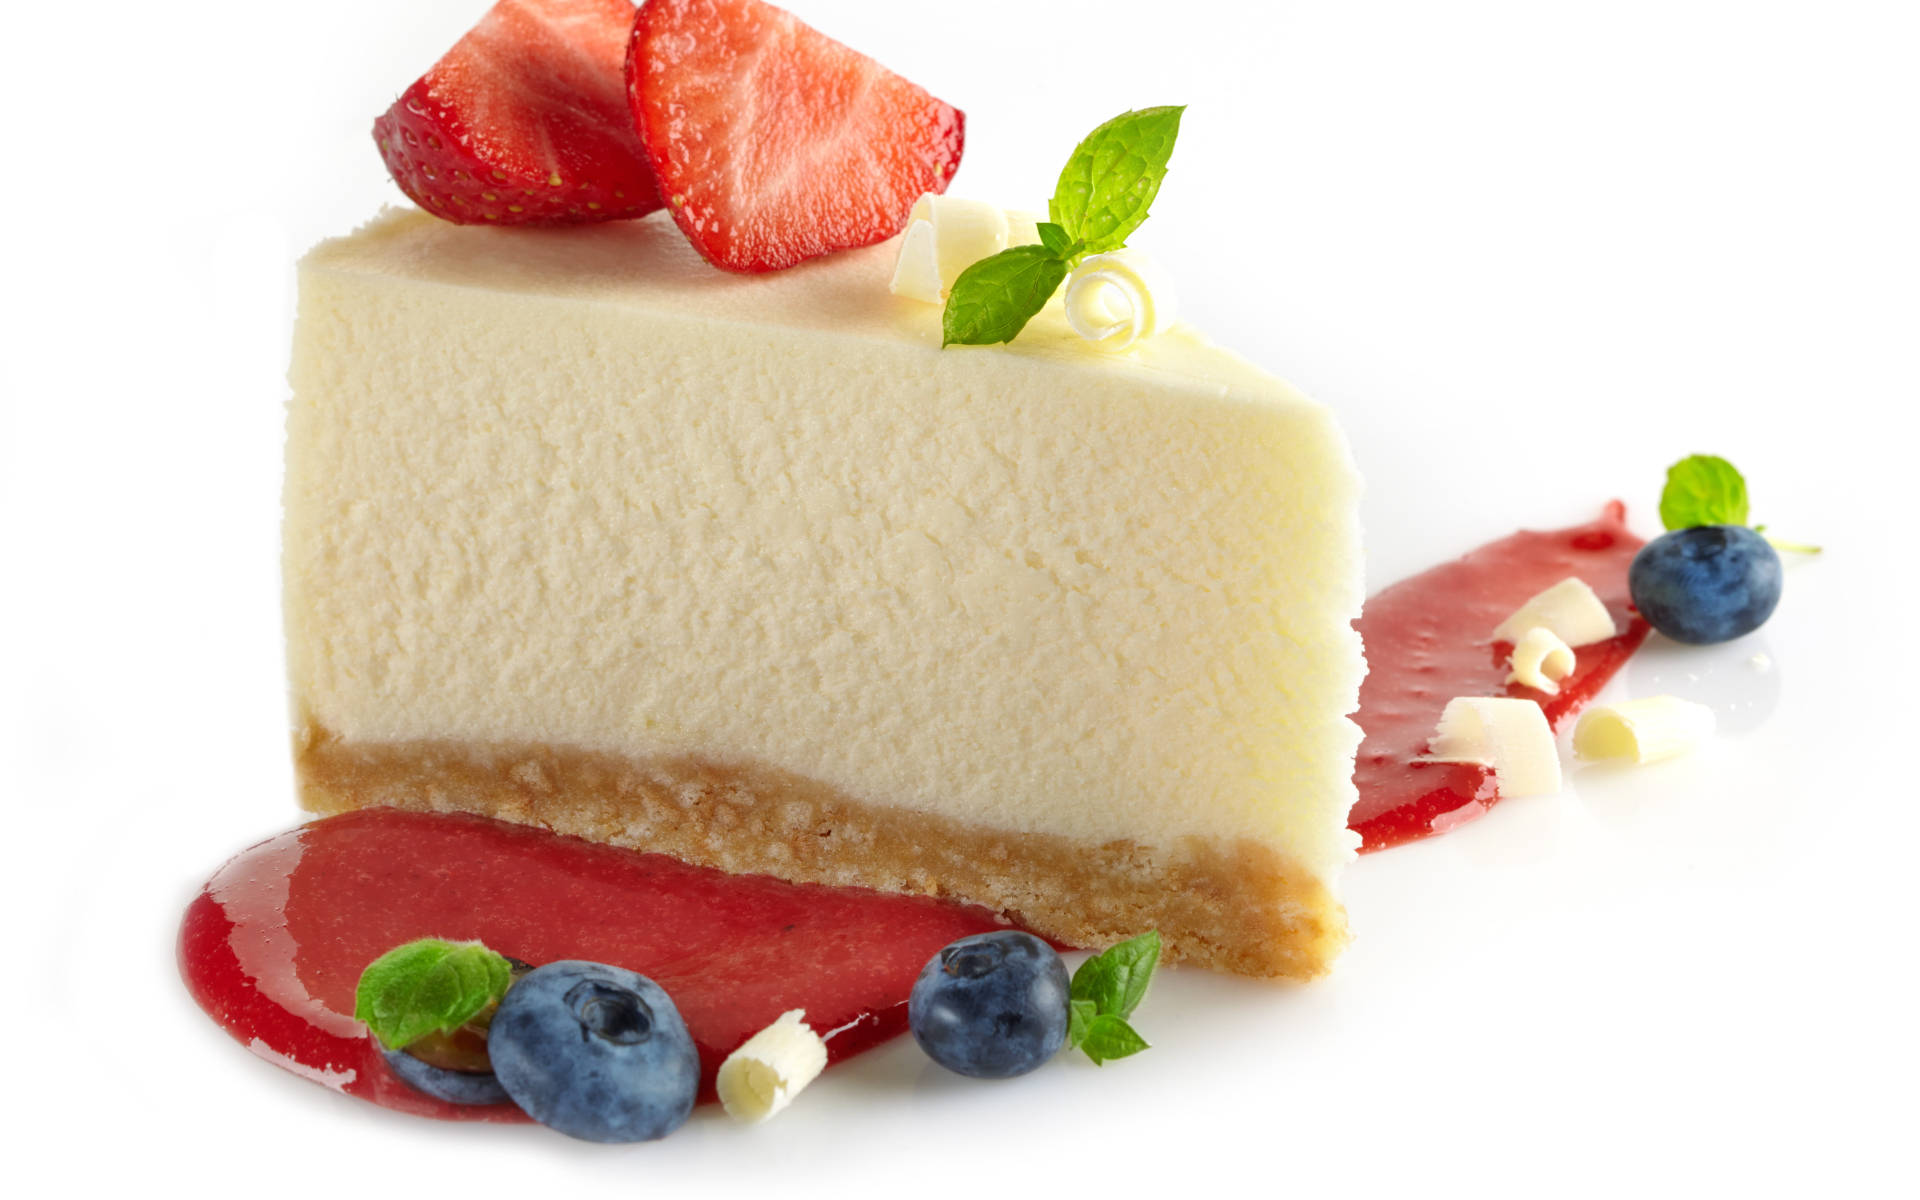 Slice Of Cheesecake With Berries